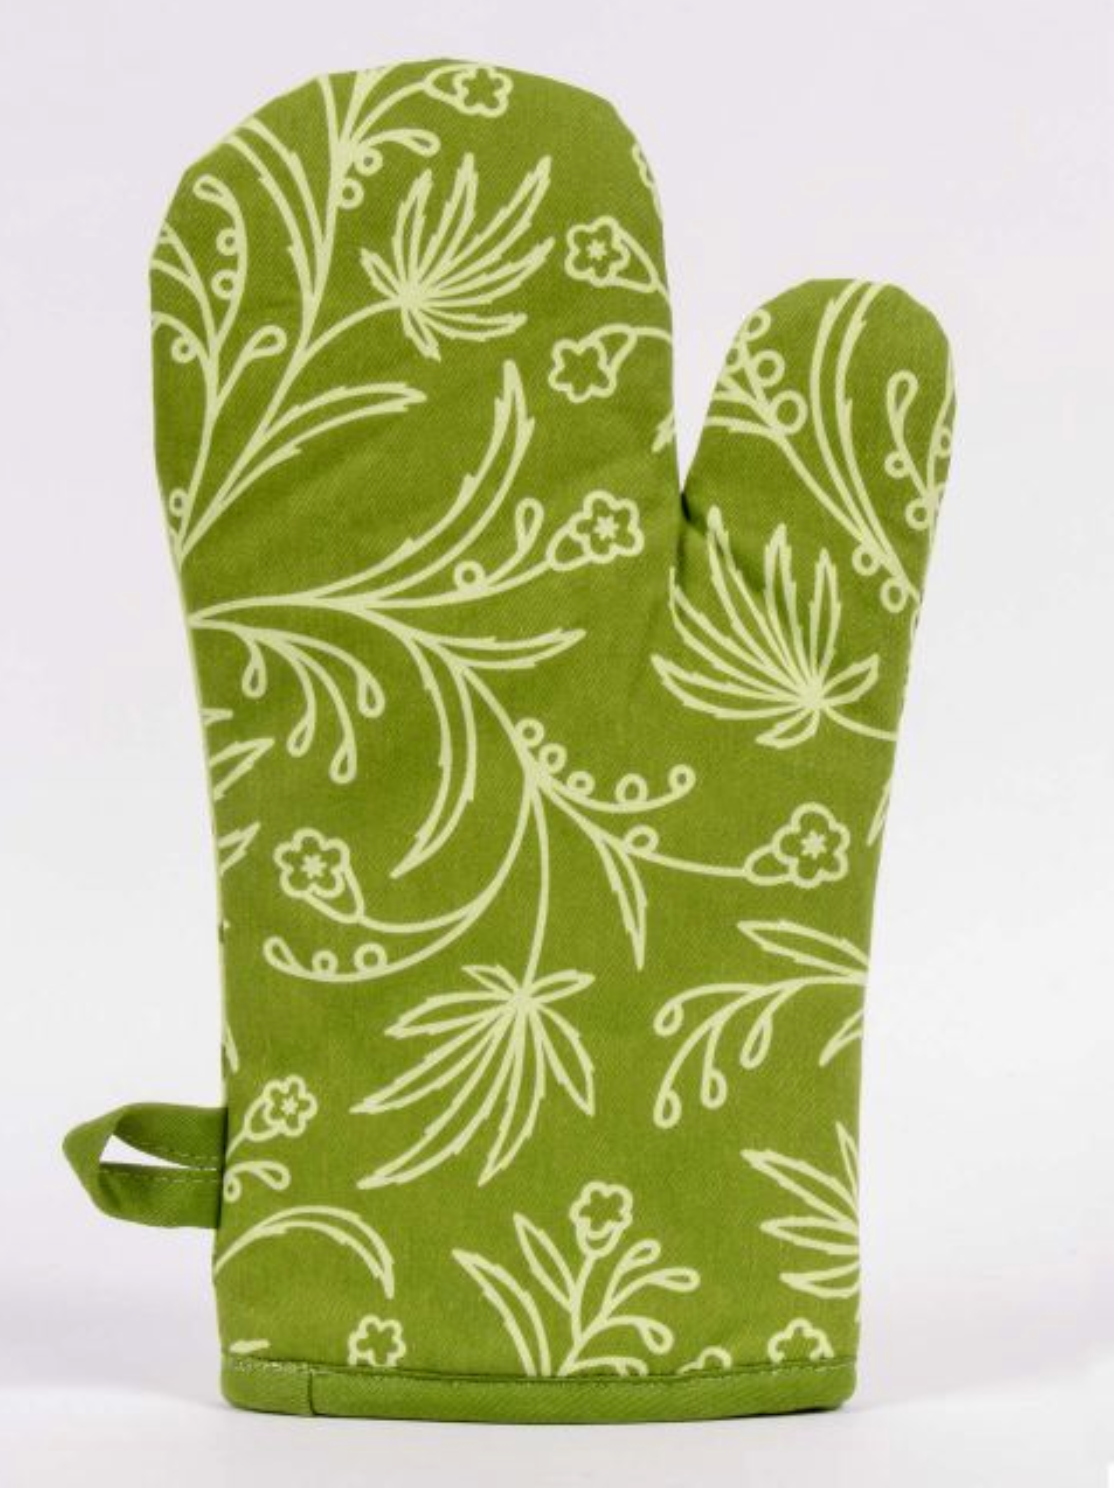 Food Has Weed in It Oven Mitt, Housewarming Gift, Pot Holder, Christmas  Gift, Hostess Gift, Funny Oven Mitts, Weed Gifts, Weed Aprons 